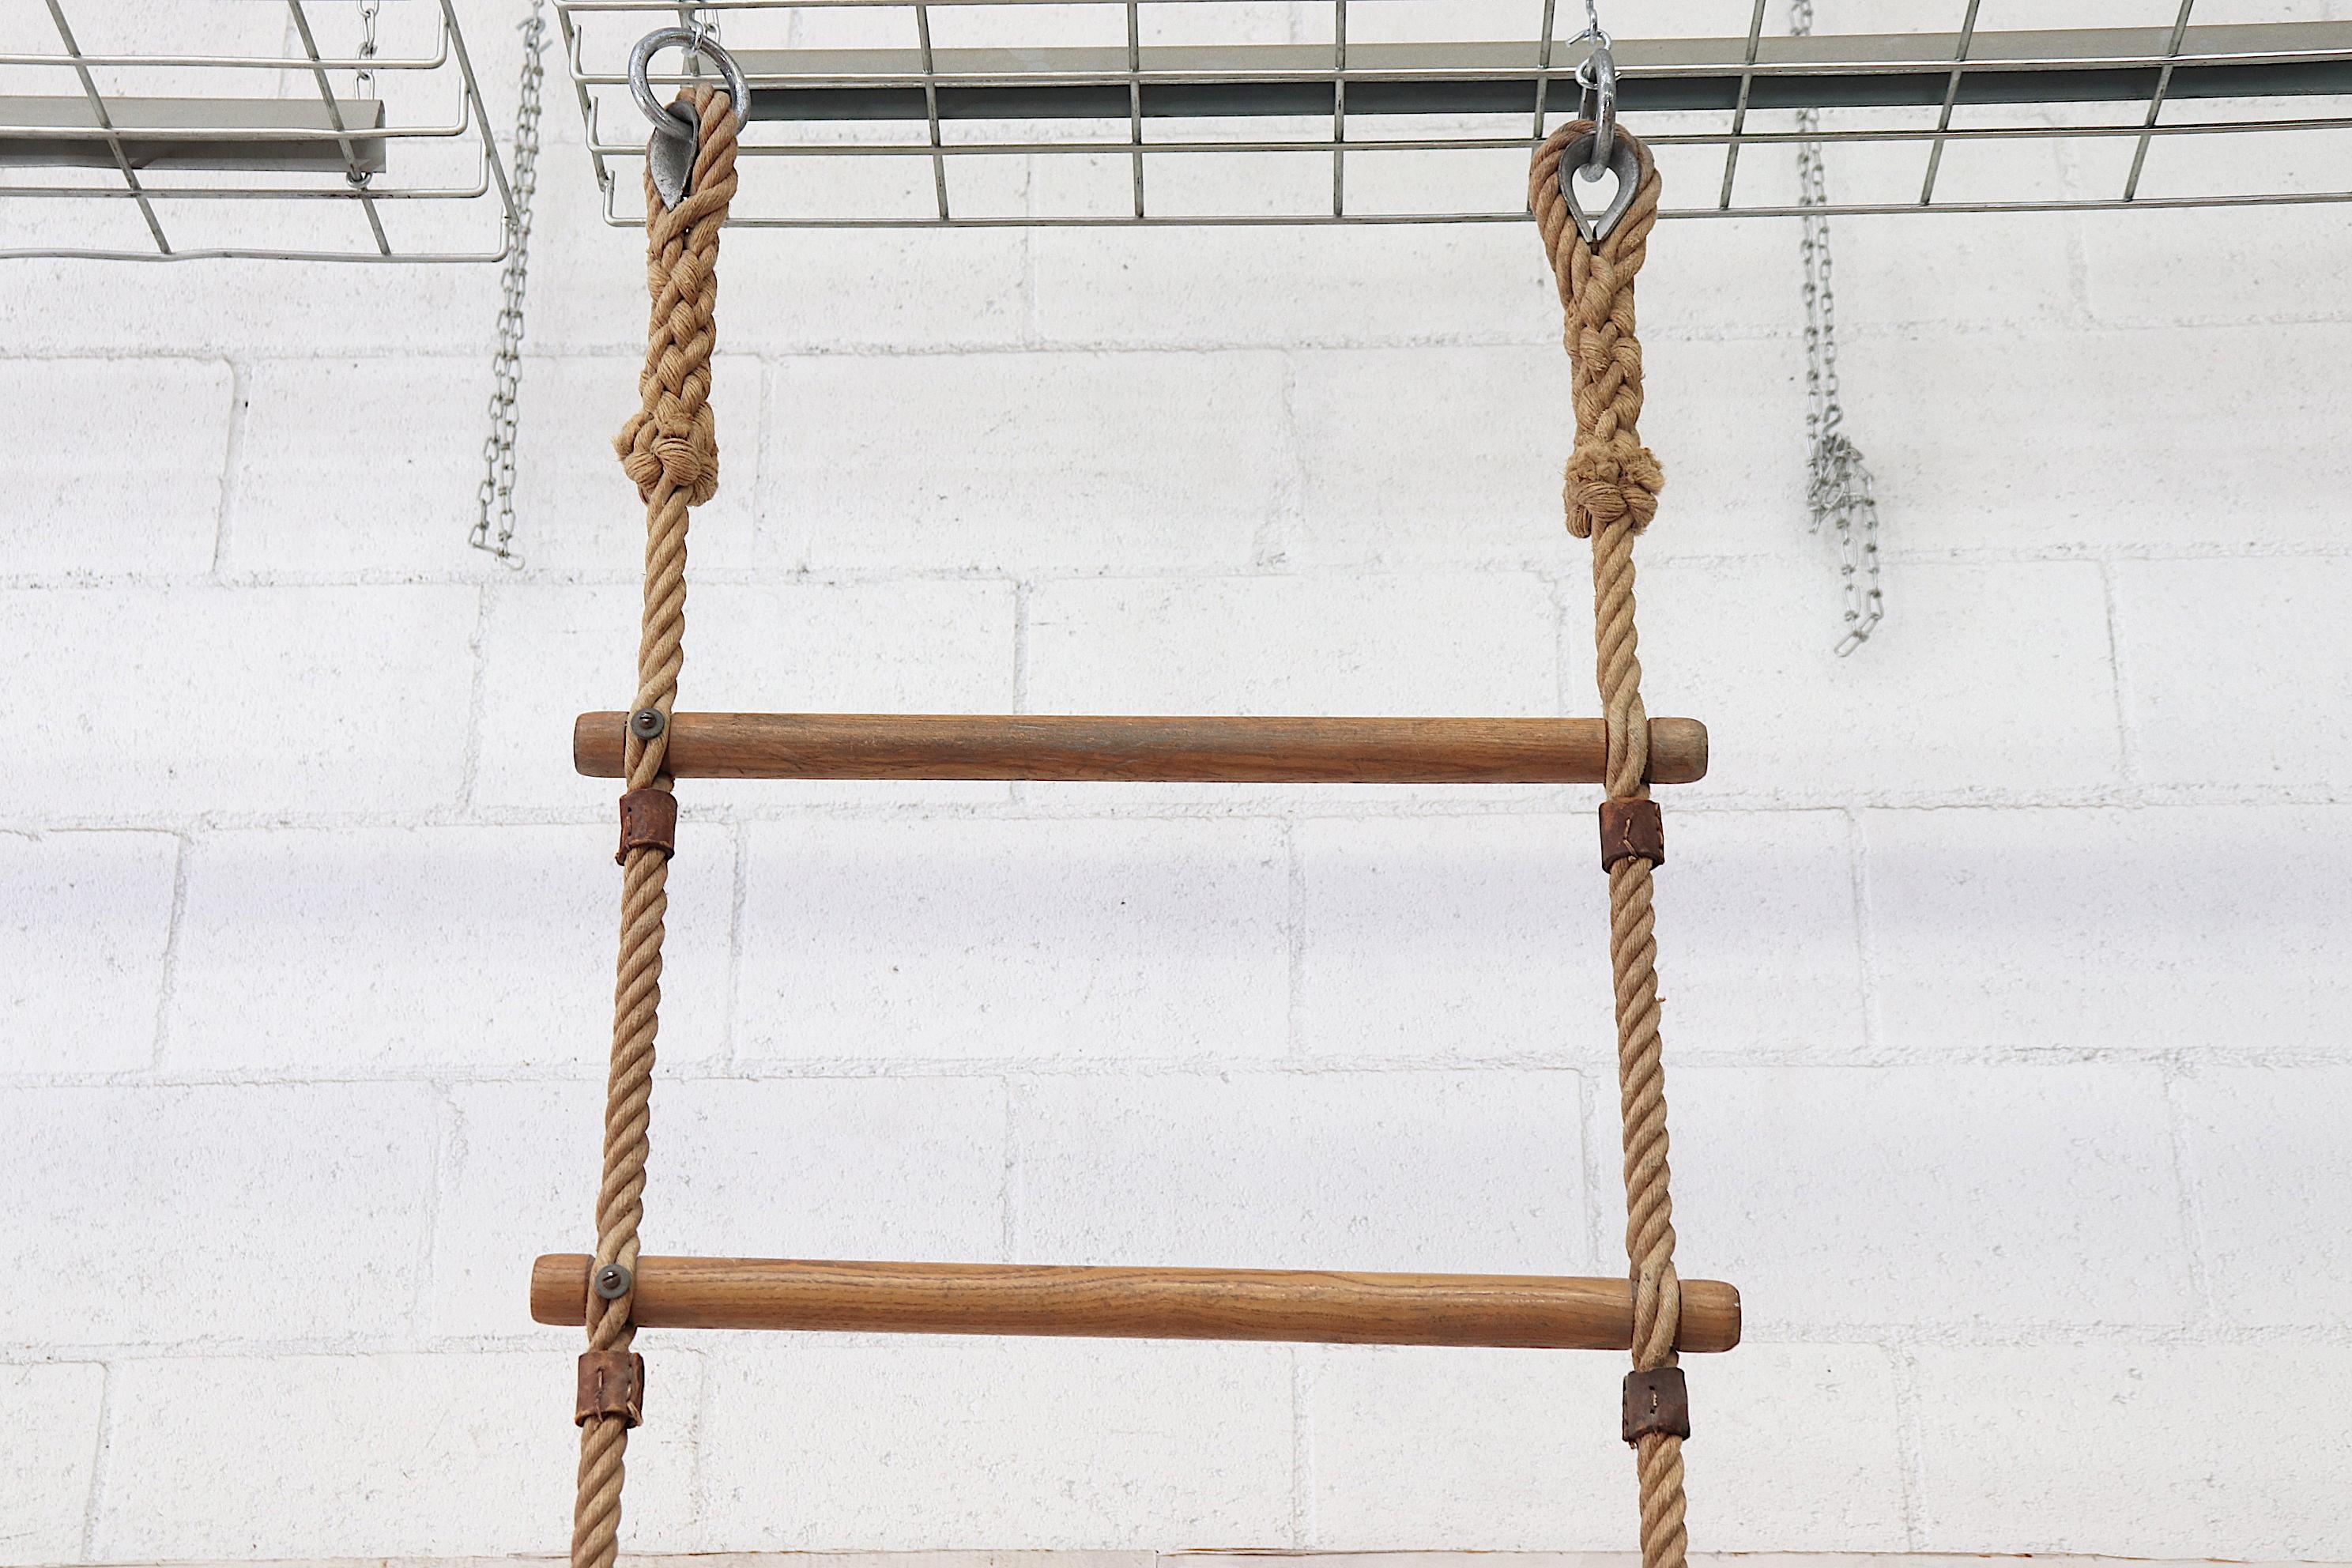 Extra tall vintage Dutch school gym rope ladder with leather accents and wood rungs. Very original condition, has some fraying, particularly at the end.